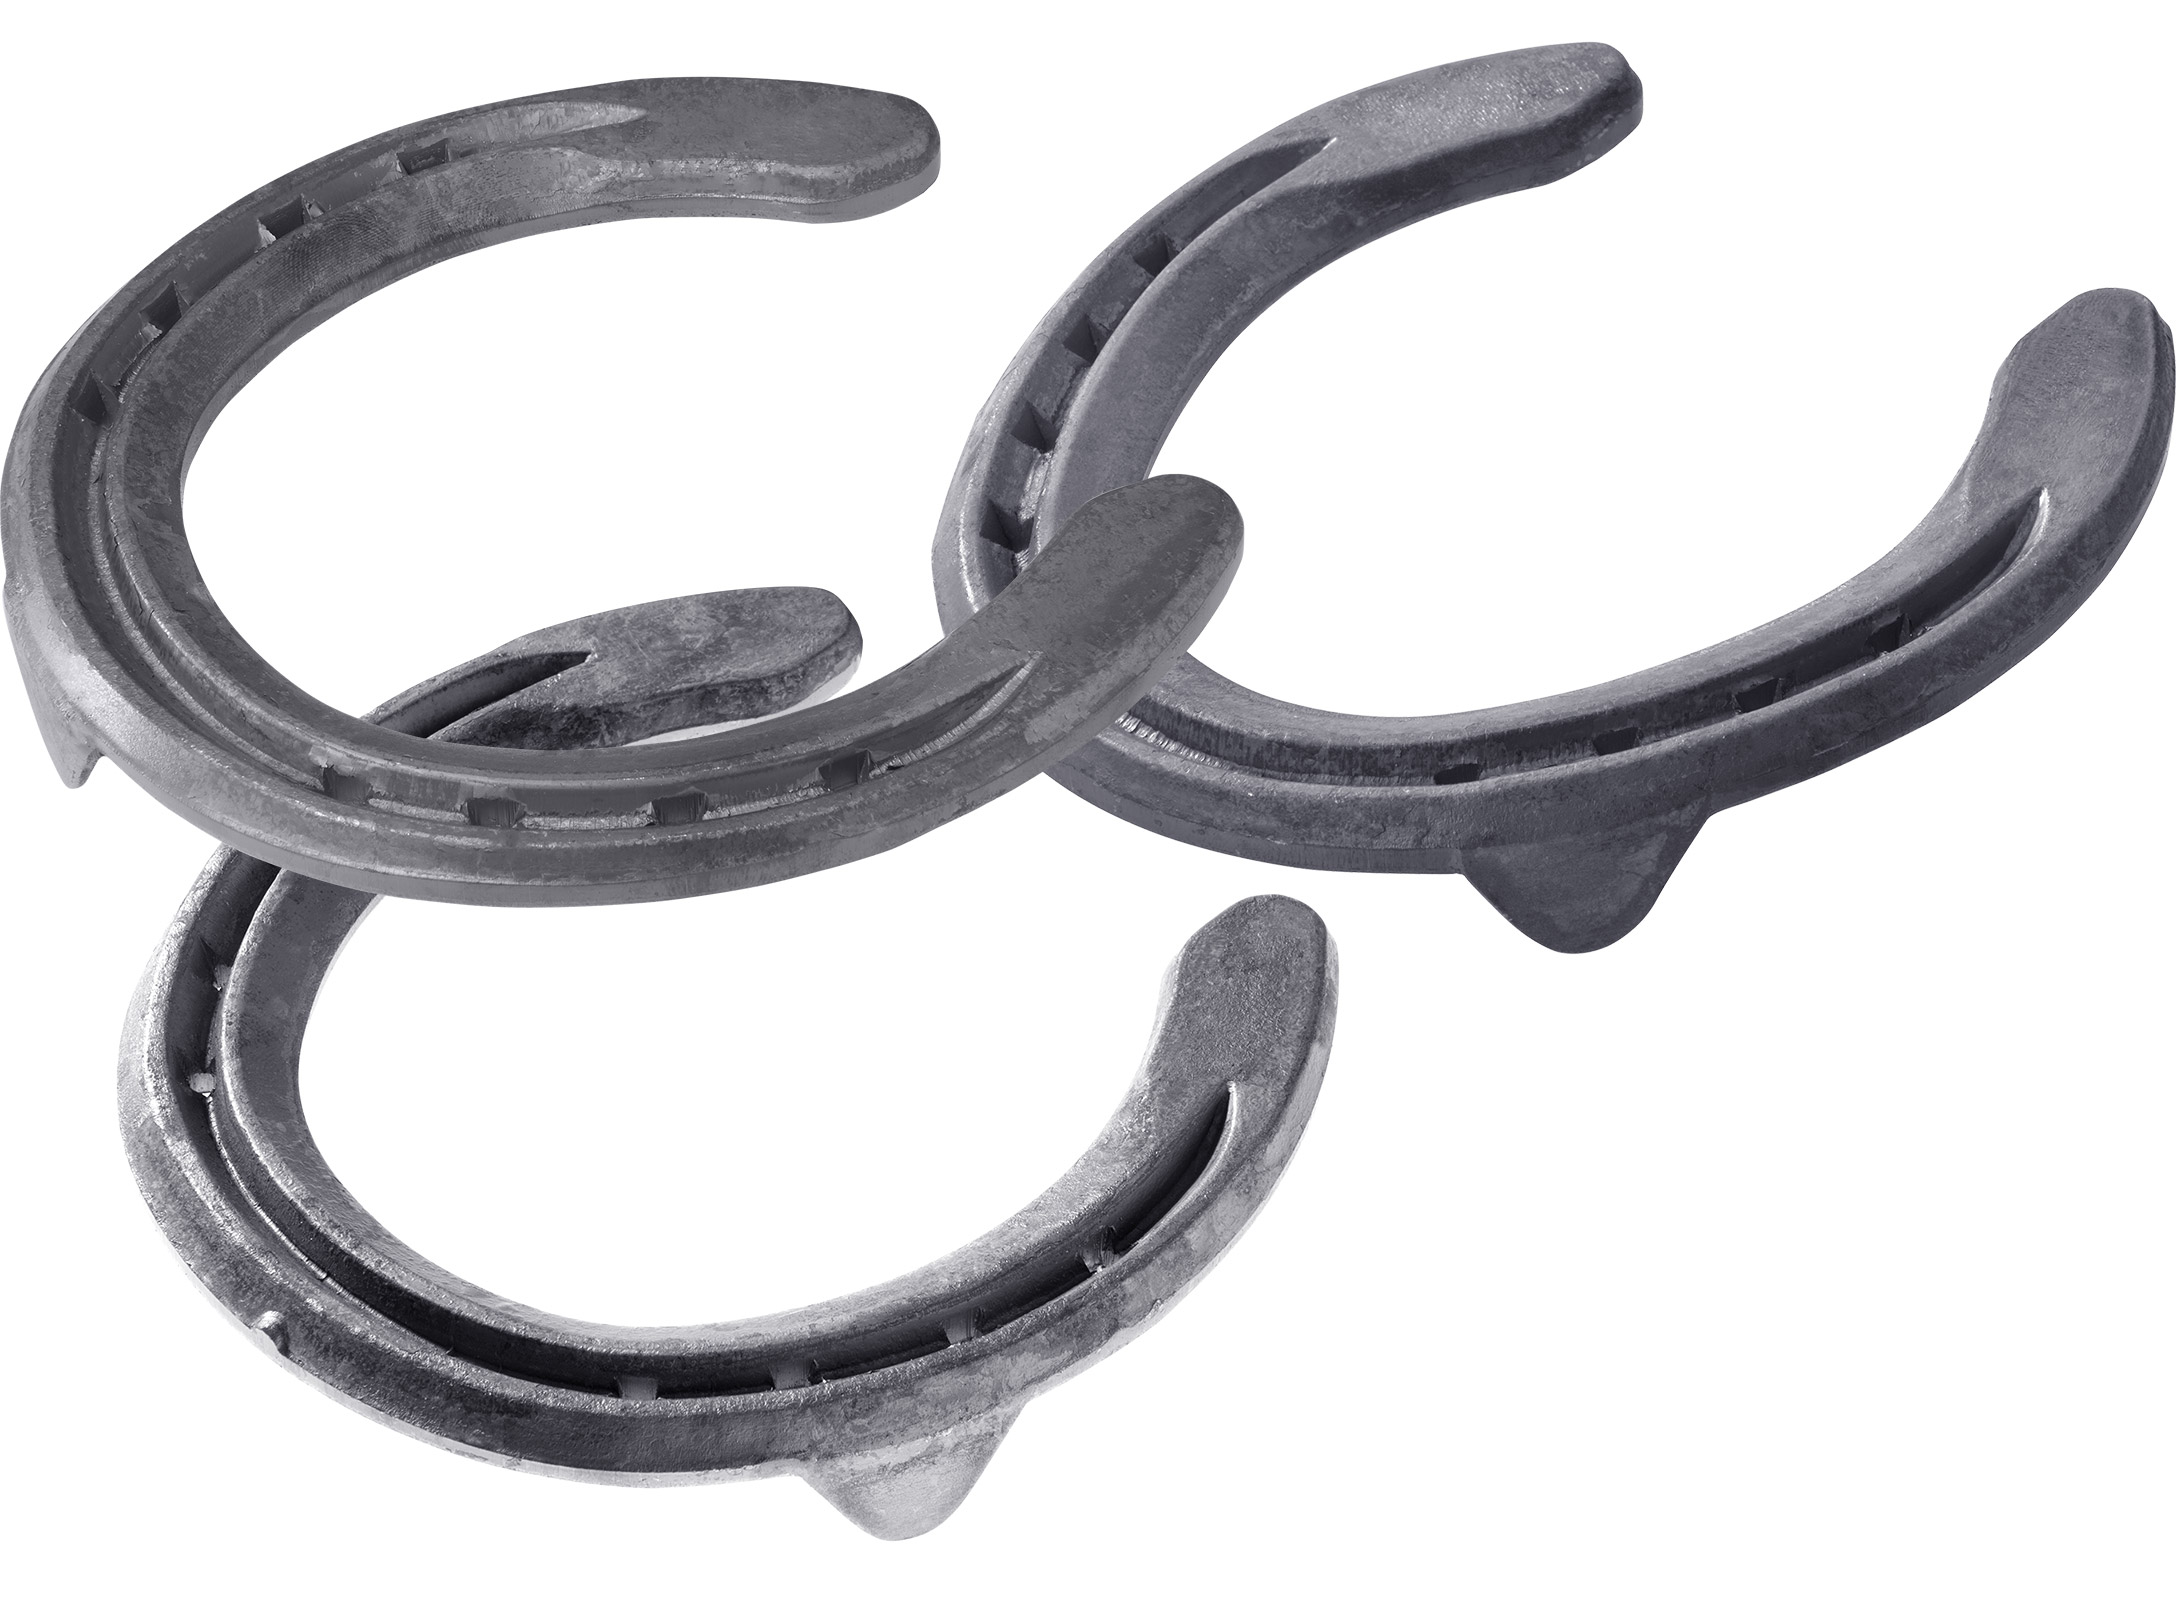 St. Croix Advantage Steel horseshoes, front toe clip and  side clips, hind side clips, bottom side view